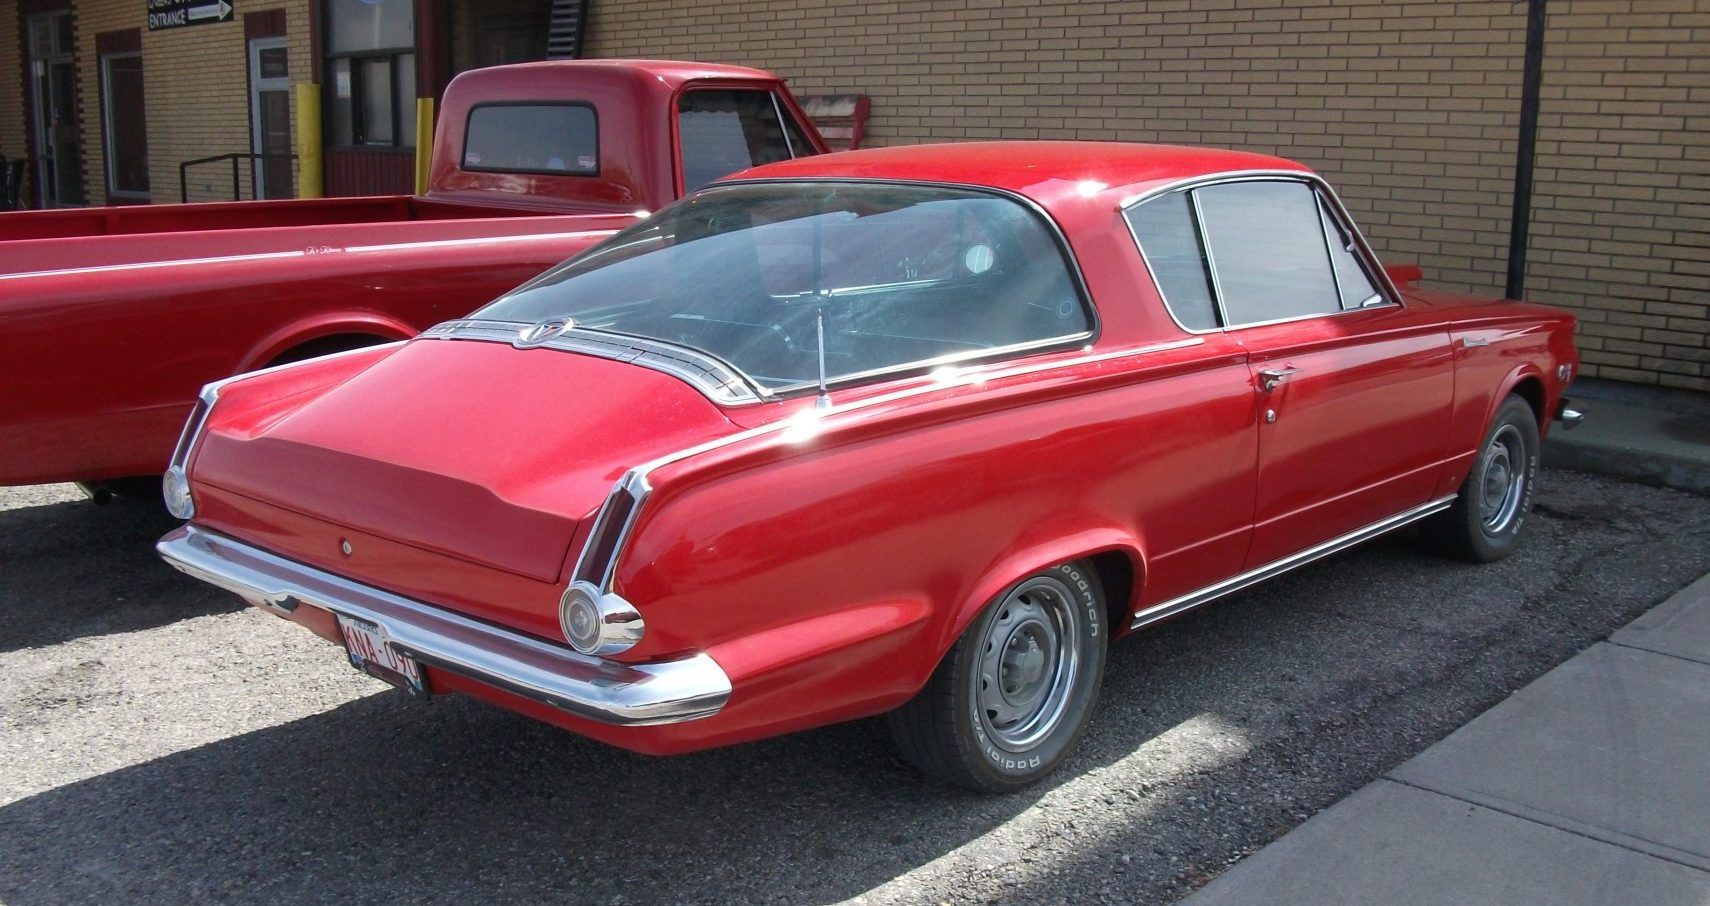 Red Plymouth Valiant Barracuda